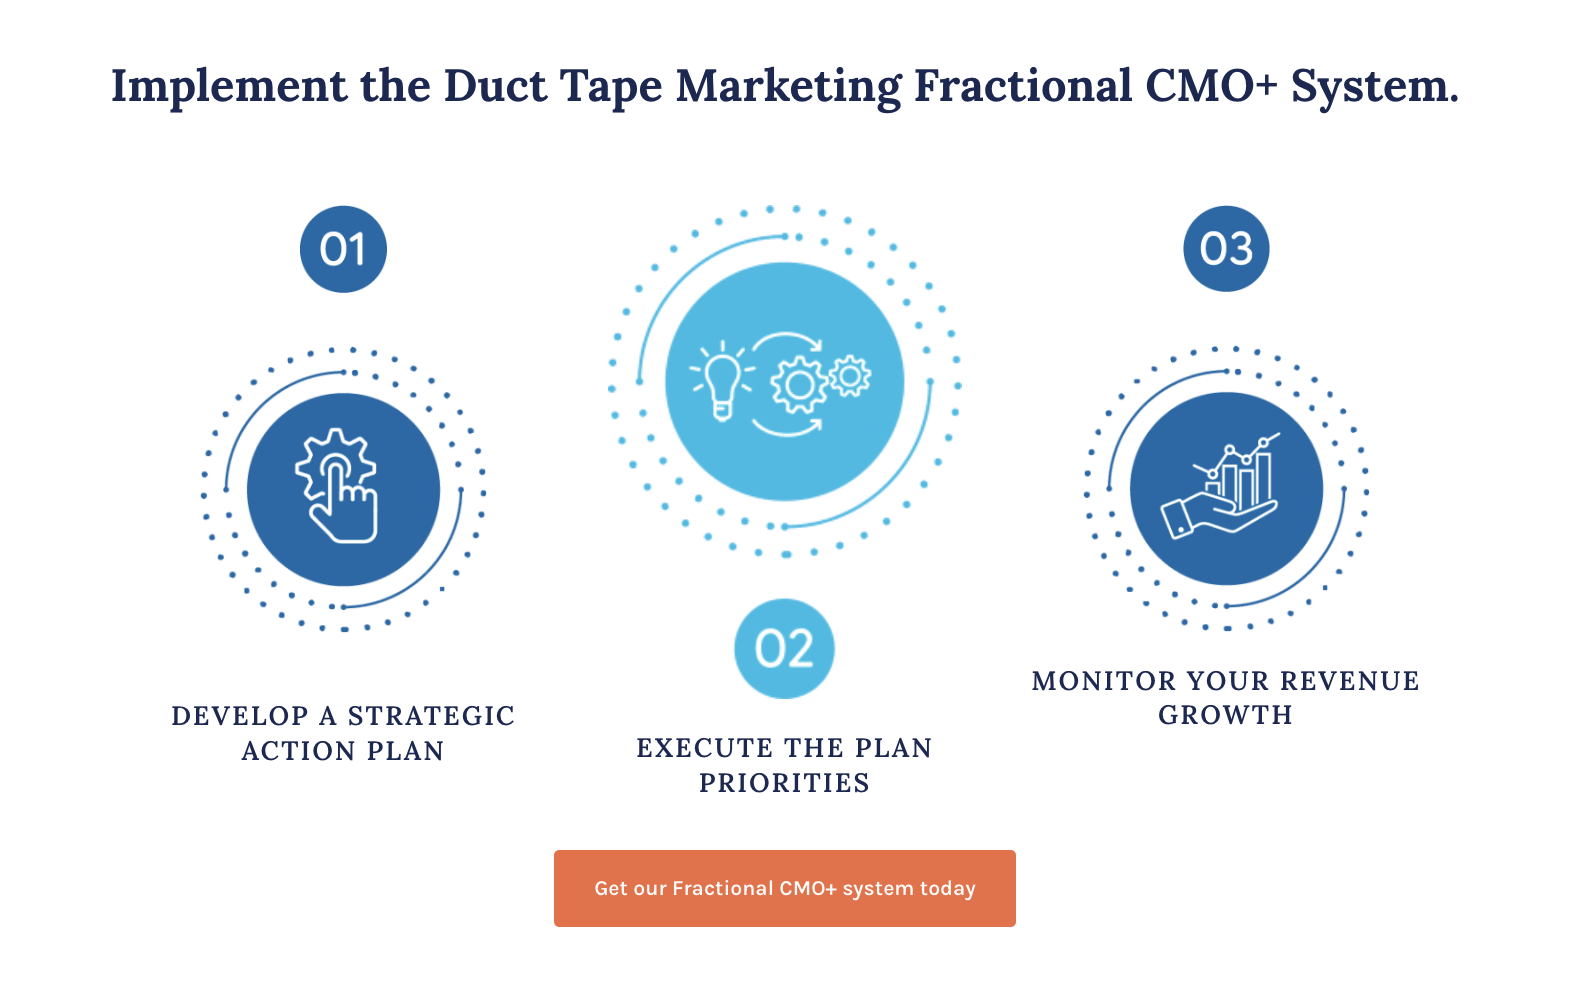 Duct Tape Marketing Fractional CMO+ System